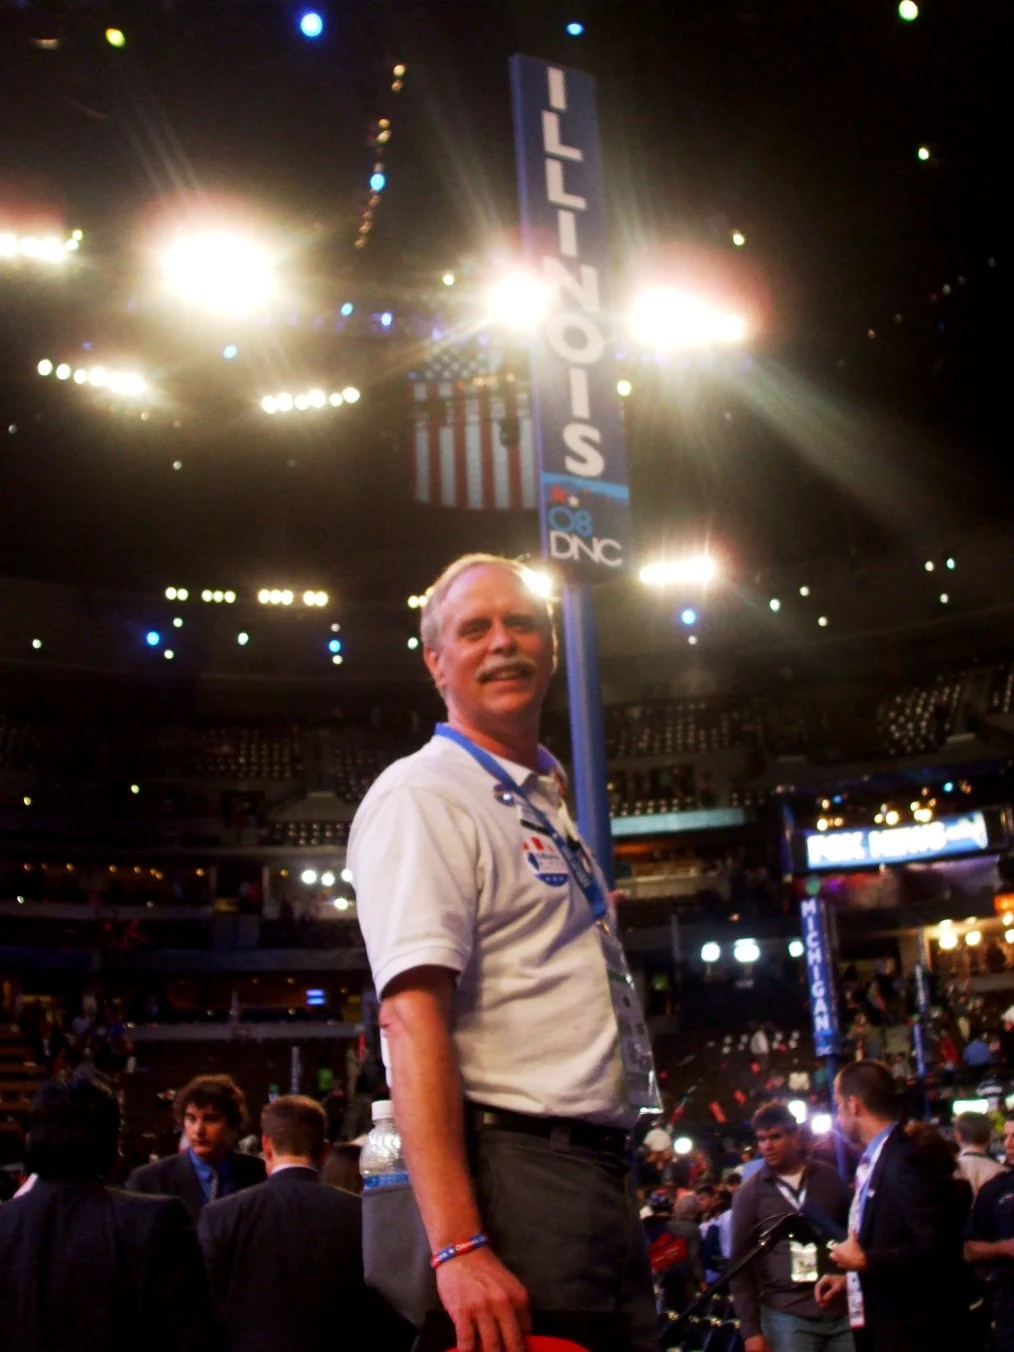 Bright spotlights light up a White man with white hair and white mustache as stands sideways in front of a blue pole with a sign reading "Illinois 08 DNC." People in suit jackets stand behind him. 